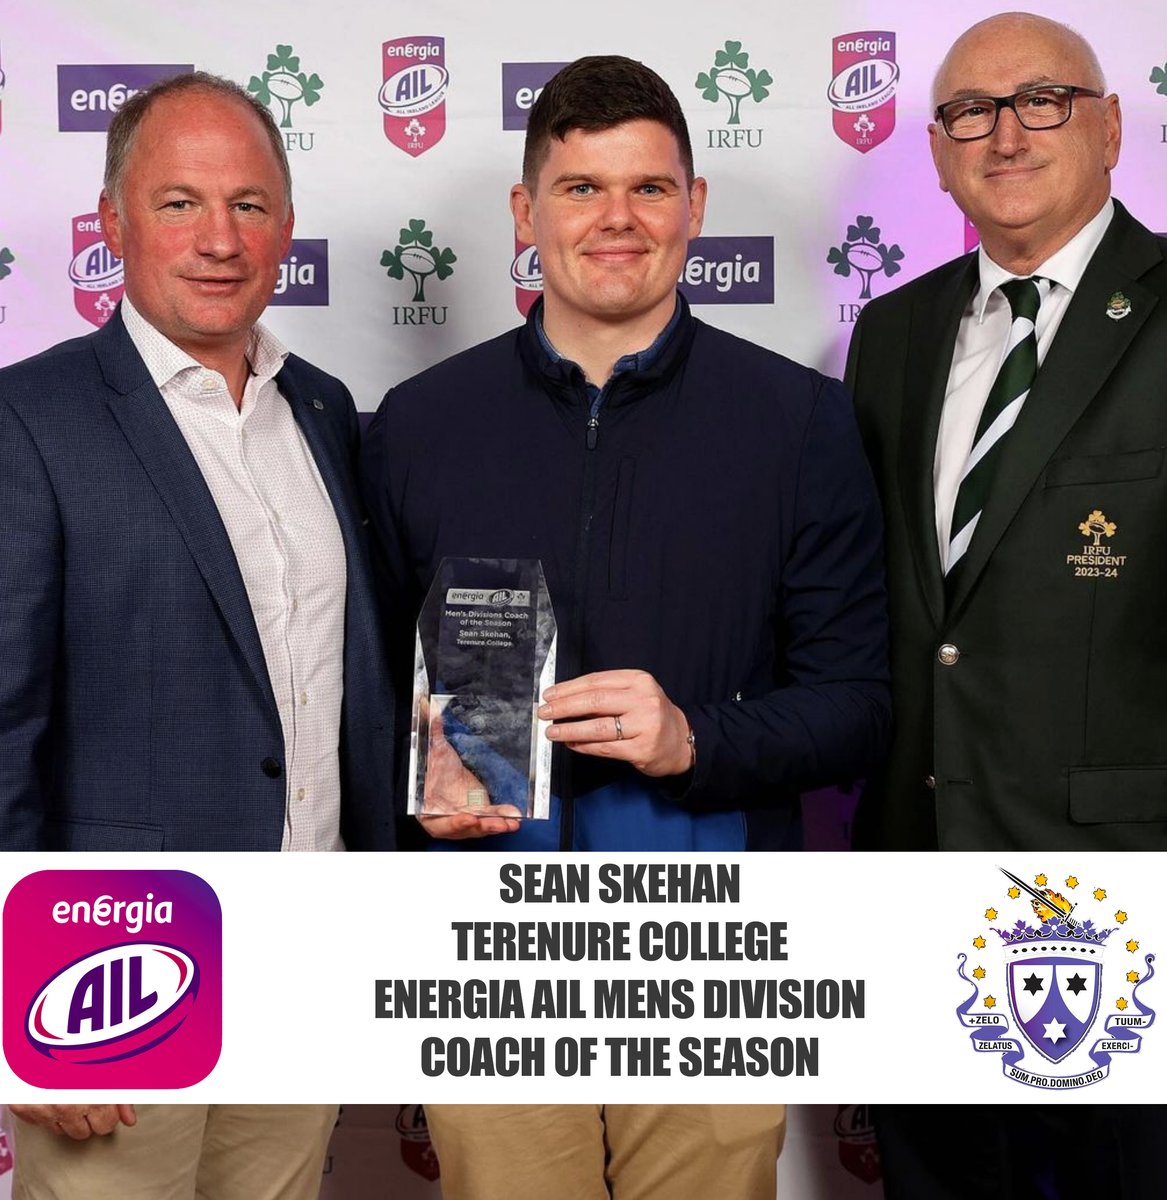 Well done to our own Sean Skehan on winning 'Coach of the Season' at the 2024 #EnergiaAIL  Awards this evening.
Richly deserved and huge congratulations.

(L-R David Humphries, Sean Skehan, Greg Barrett)